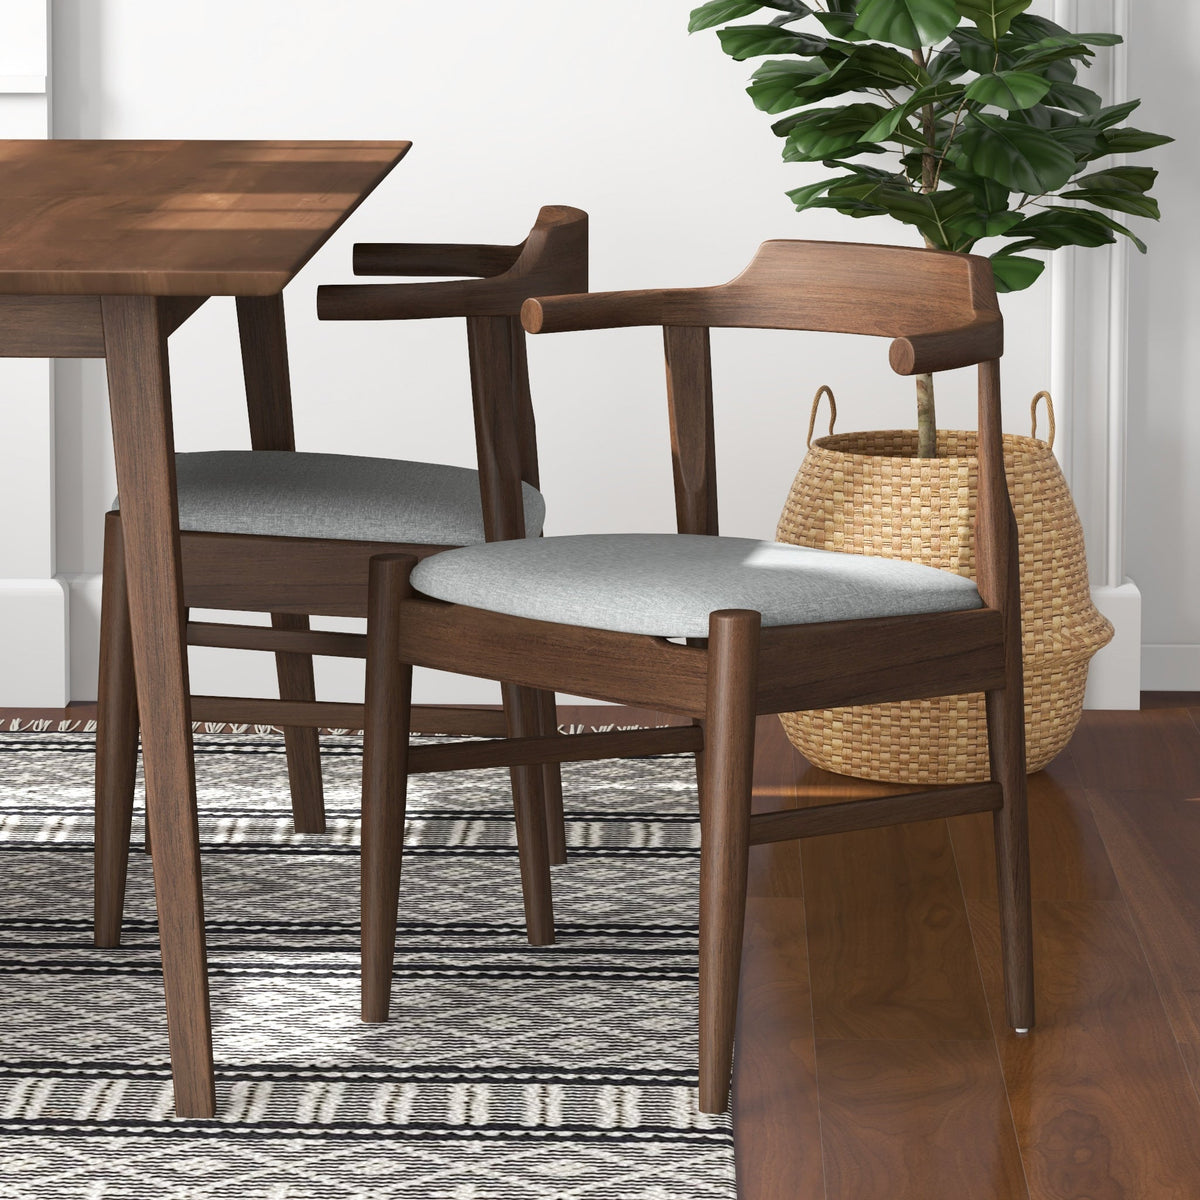 Alpine (Large - Walnut) Dining Set with 4 Sterling (Grey) Dining Chairs | Mid in Mod | Houston TX | Best Furniture stores in Houston